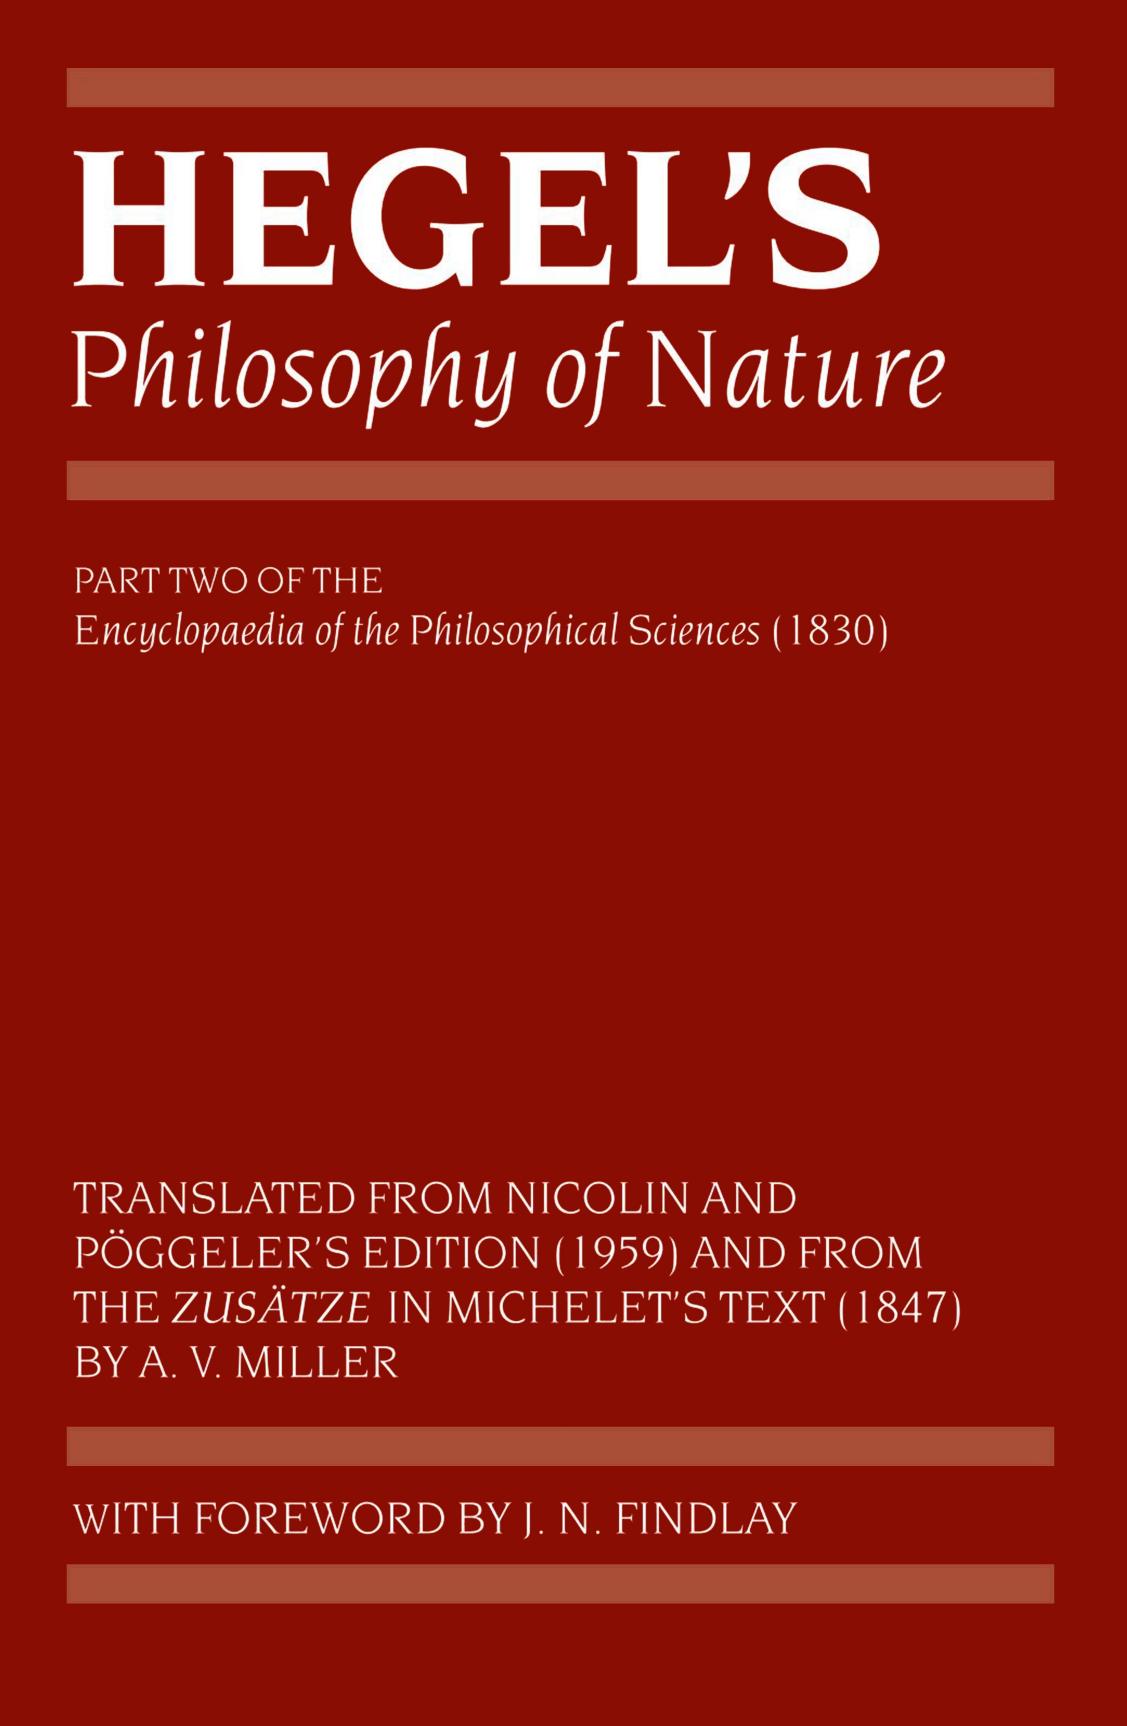 Hegel's Philosophy of Nature: Being Part Two of the Encyclopedia of the Philosophical Sciences (1830), Translated From Nicolin and Pöggeler's Edition (1959), and From the Zusätze in Michelet's Text (1847)